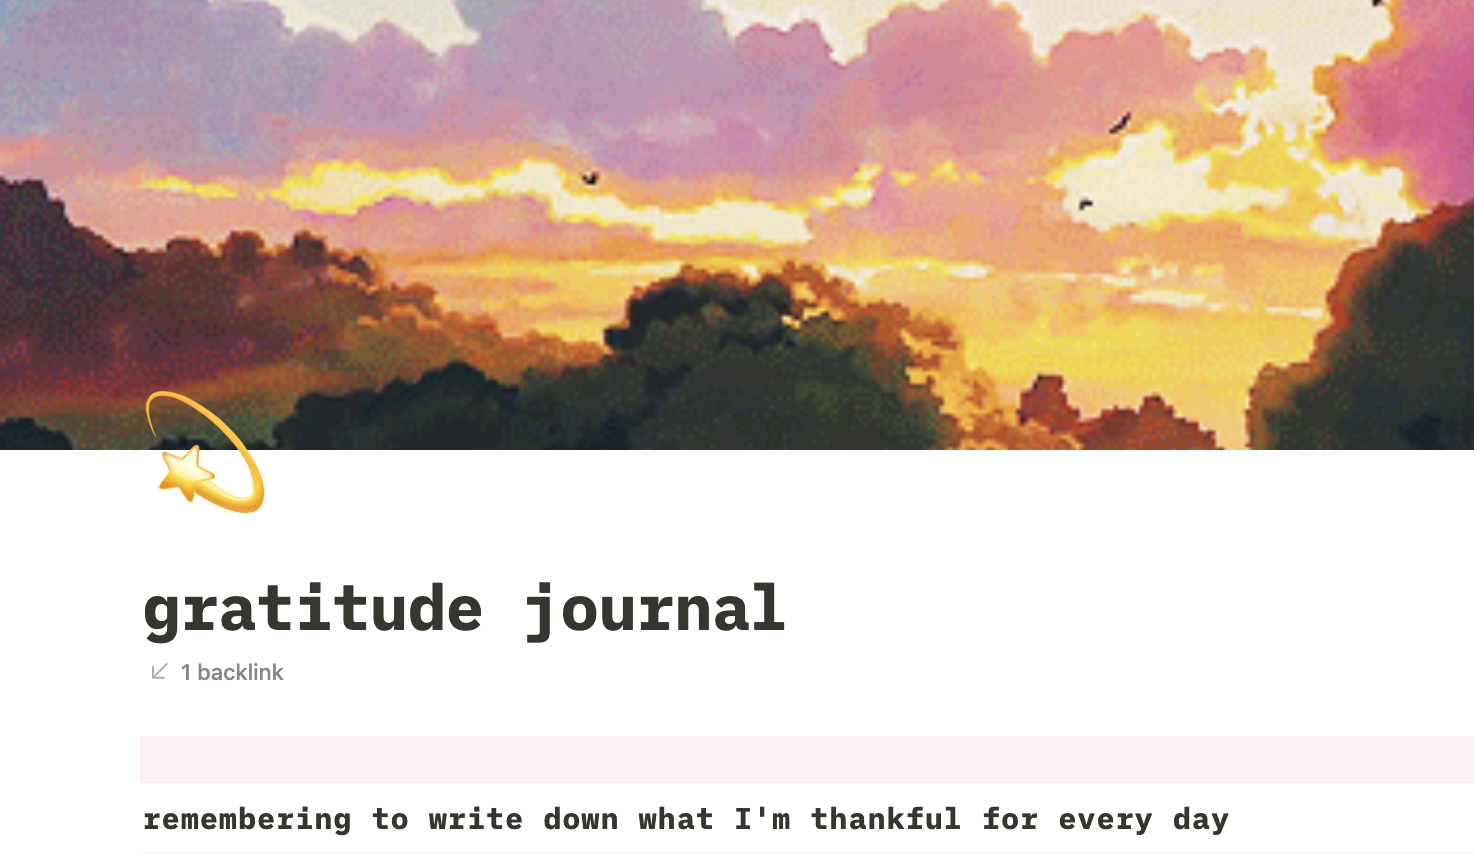 My gratitude journal, which I created on a platform called Notion. 